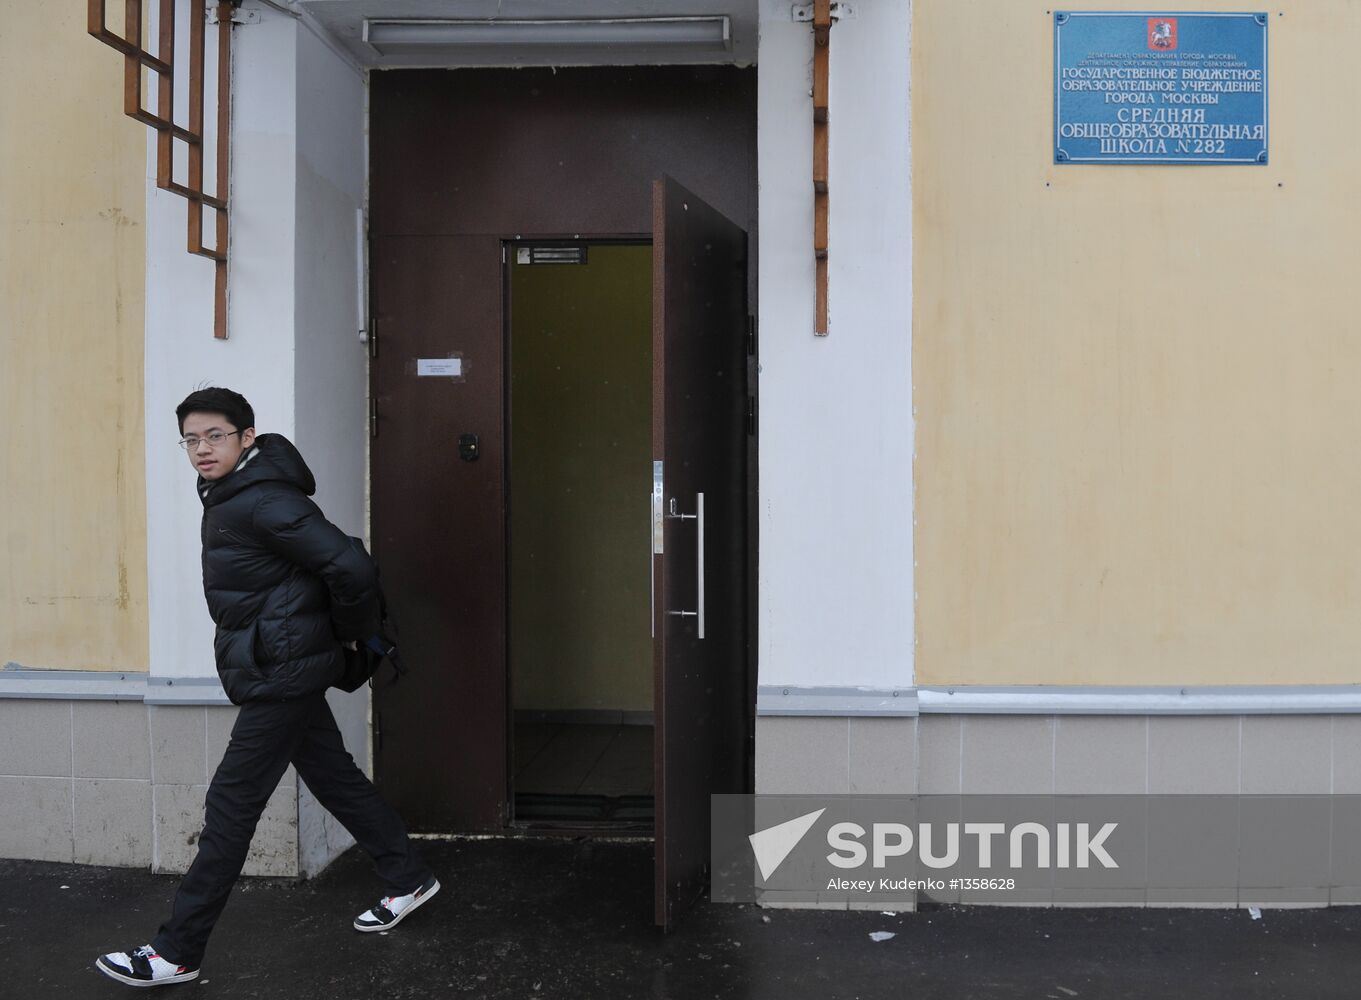 Migrants' children get education in Moscow